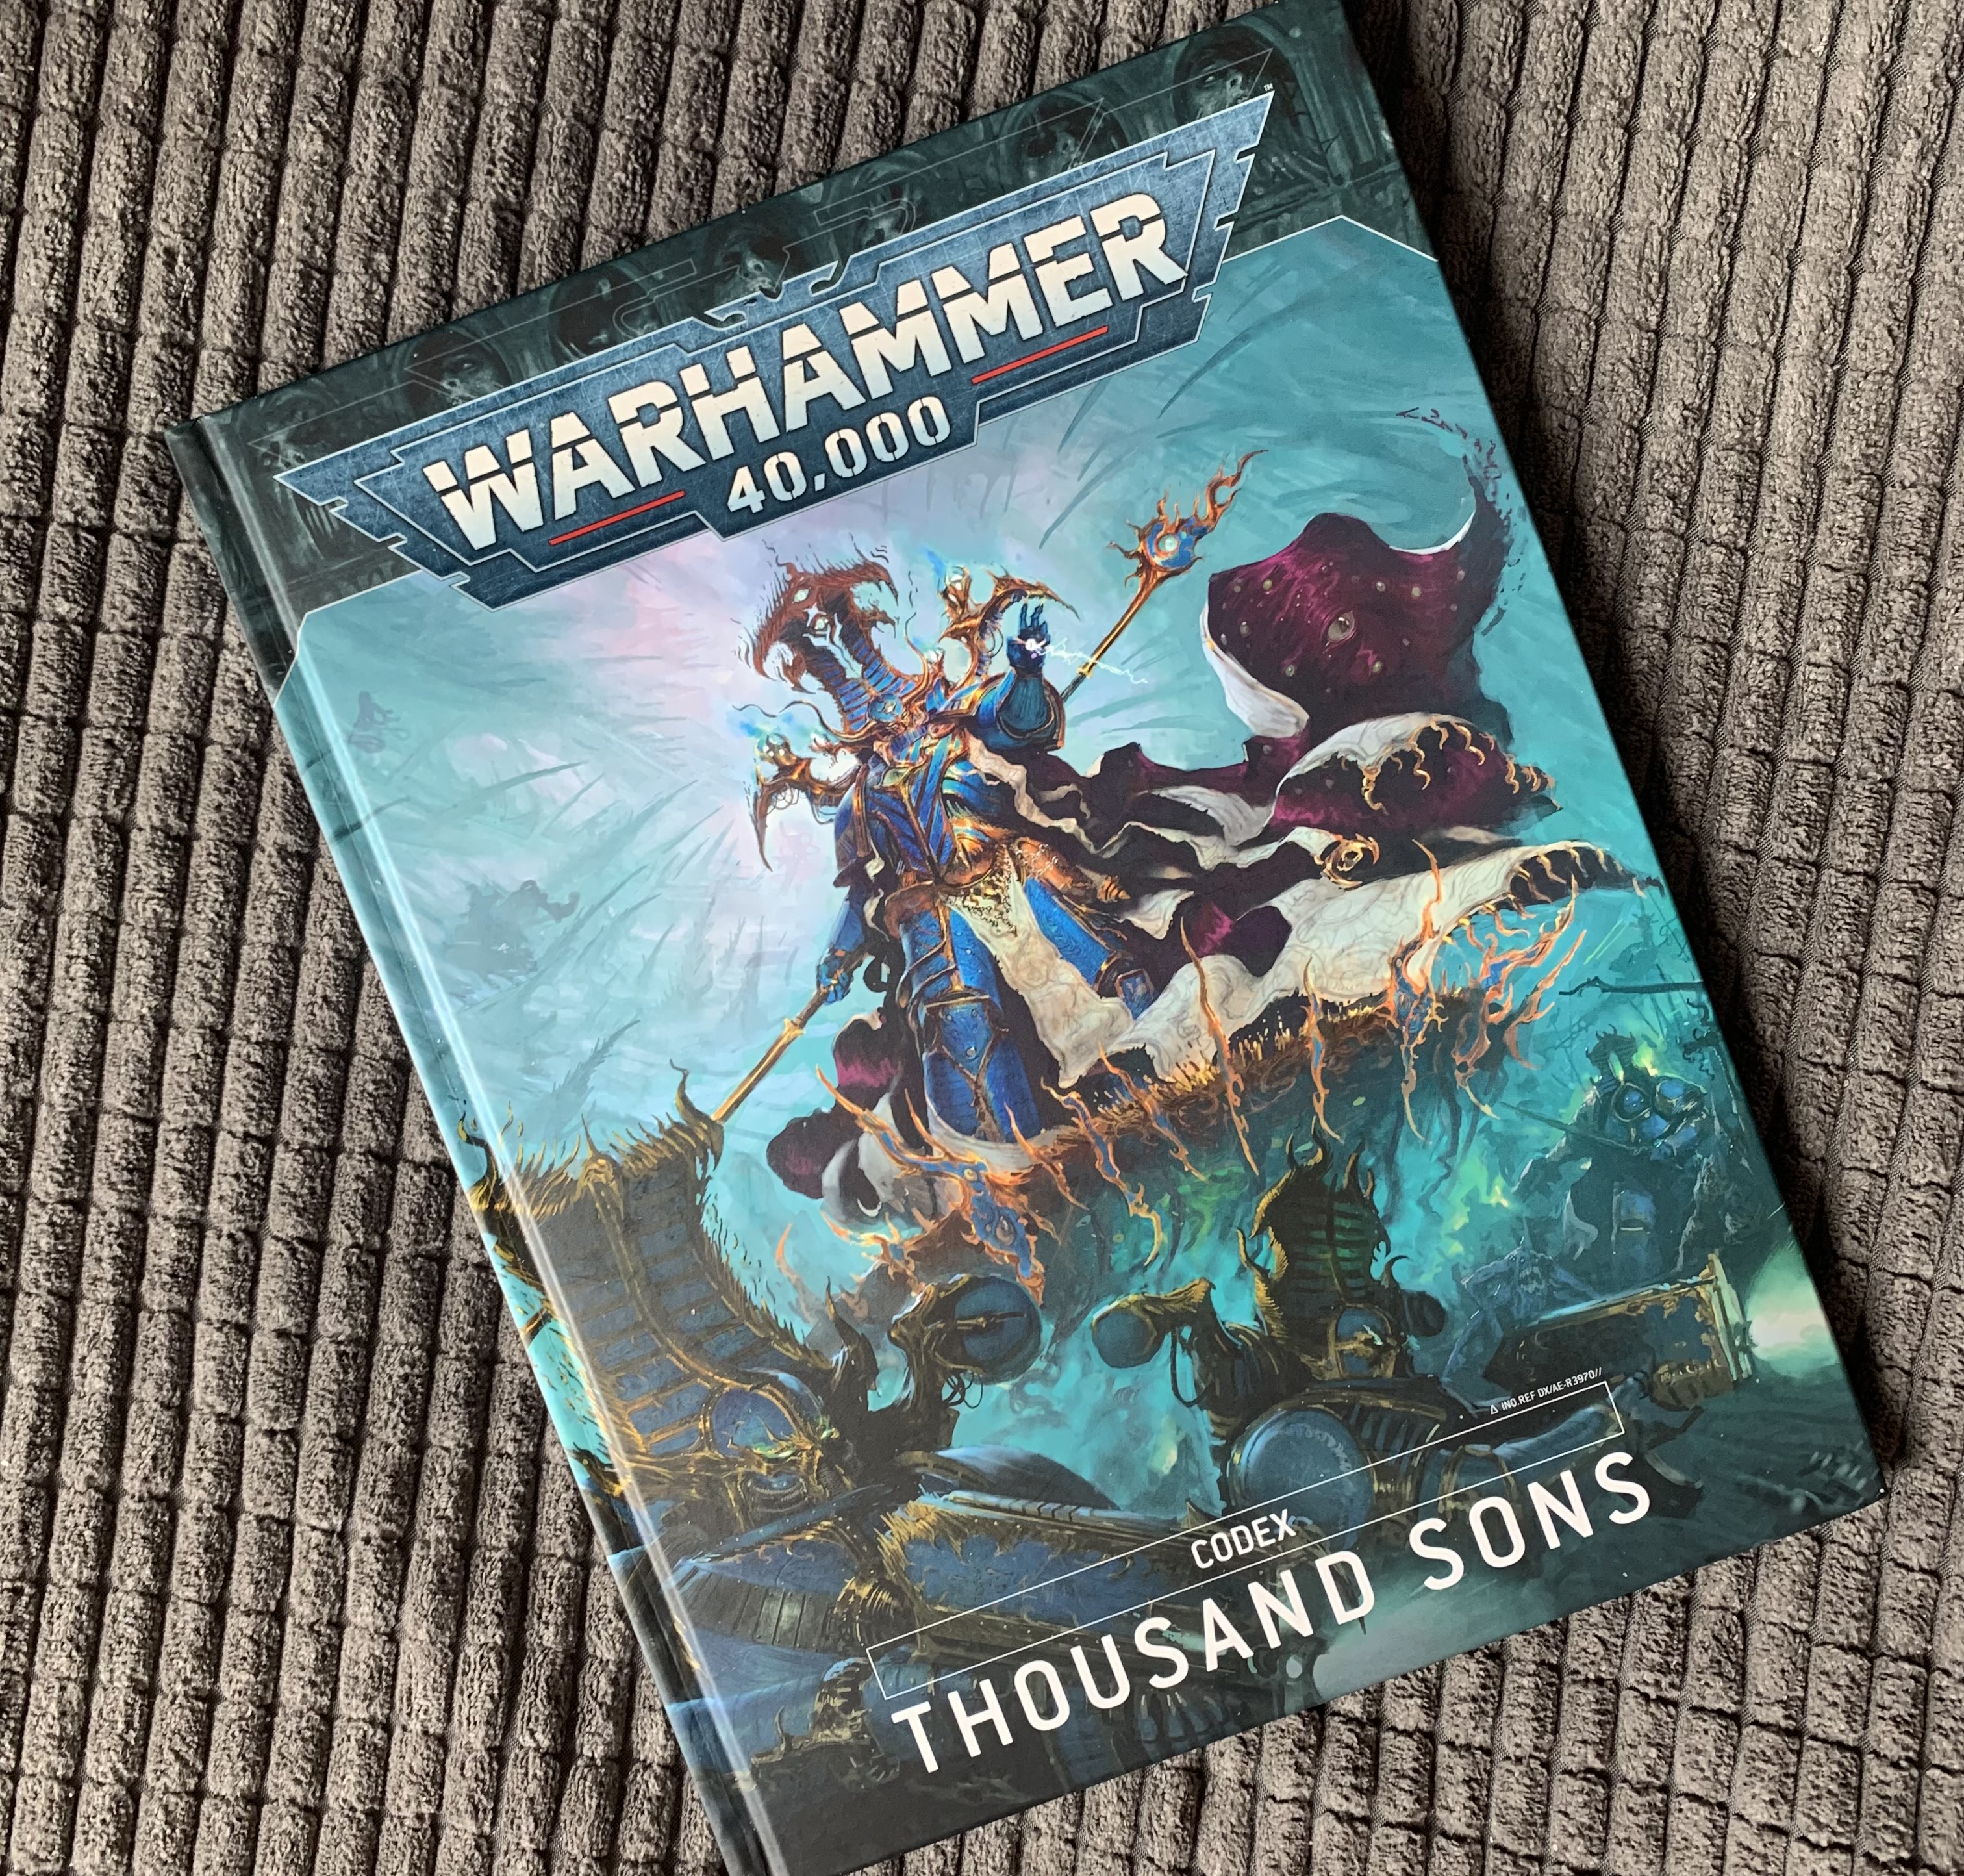 Warhammer 40k Thousand Sons army guide